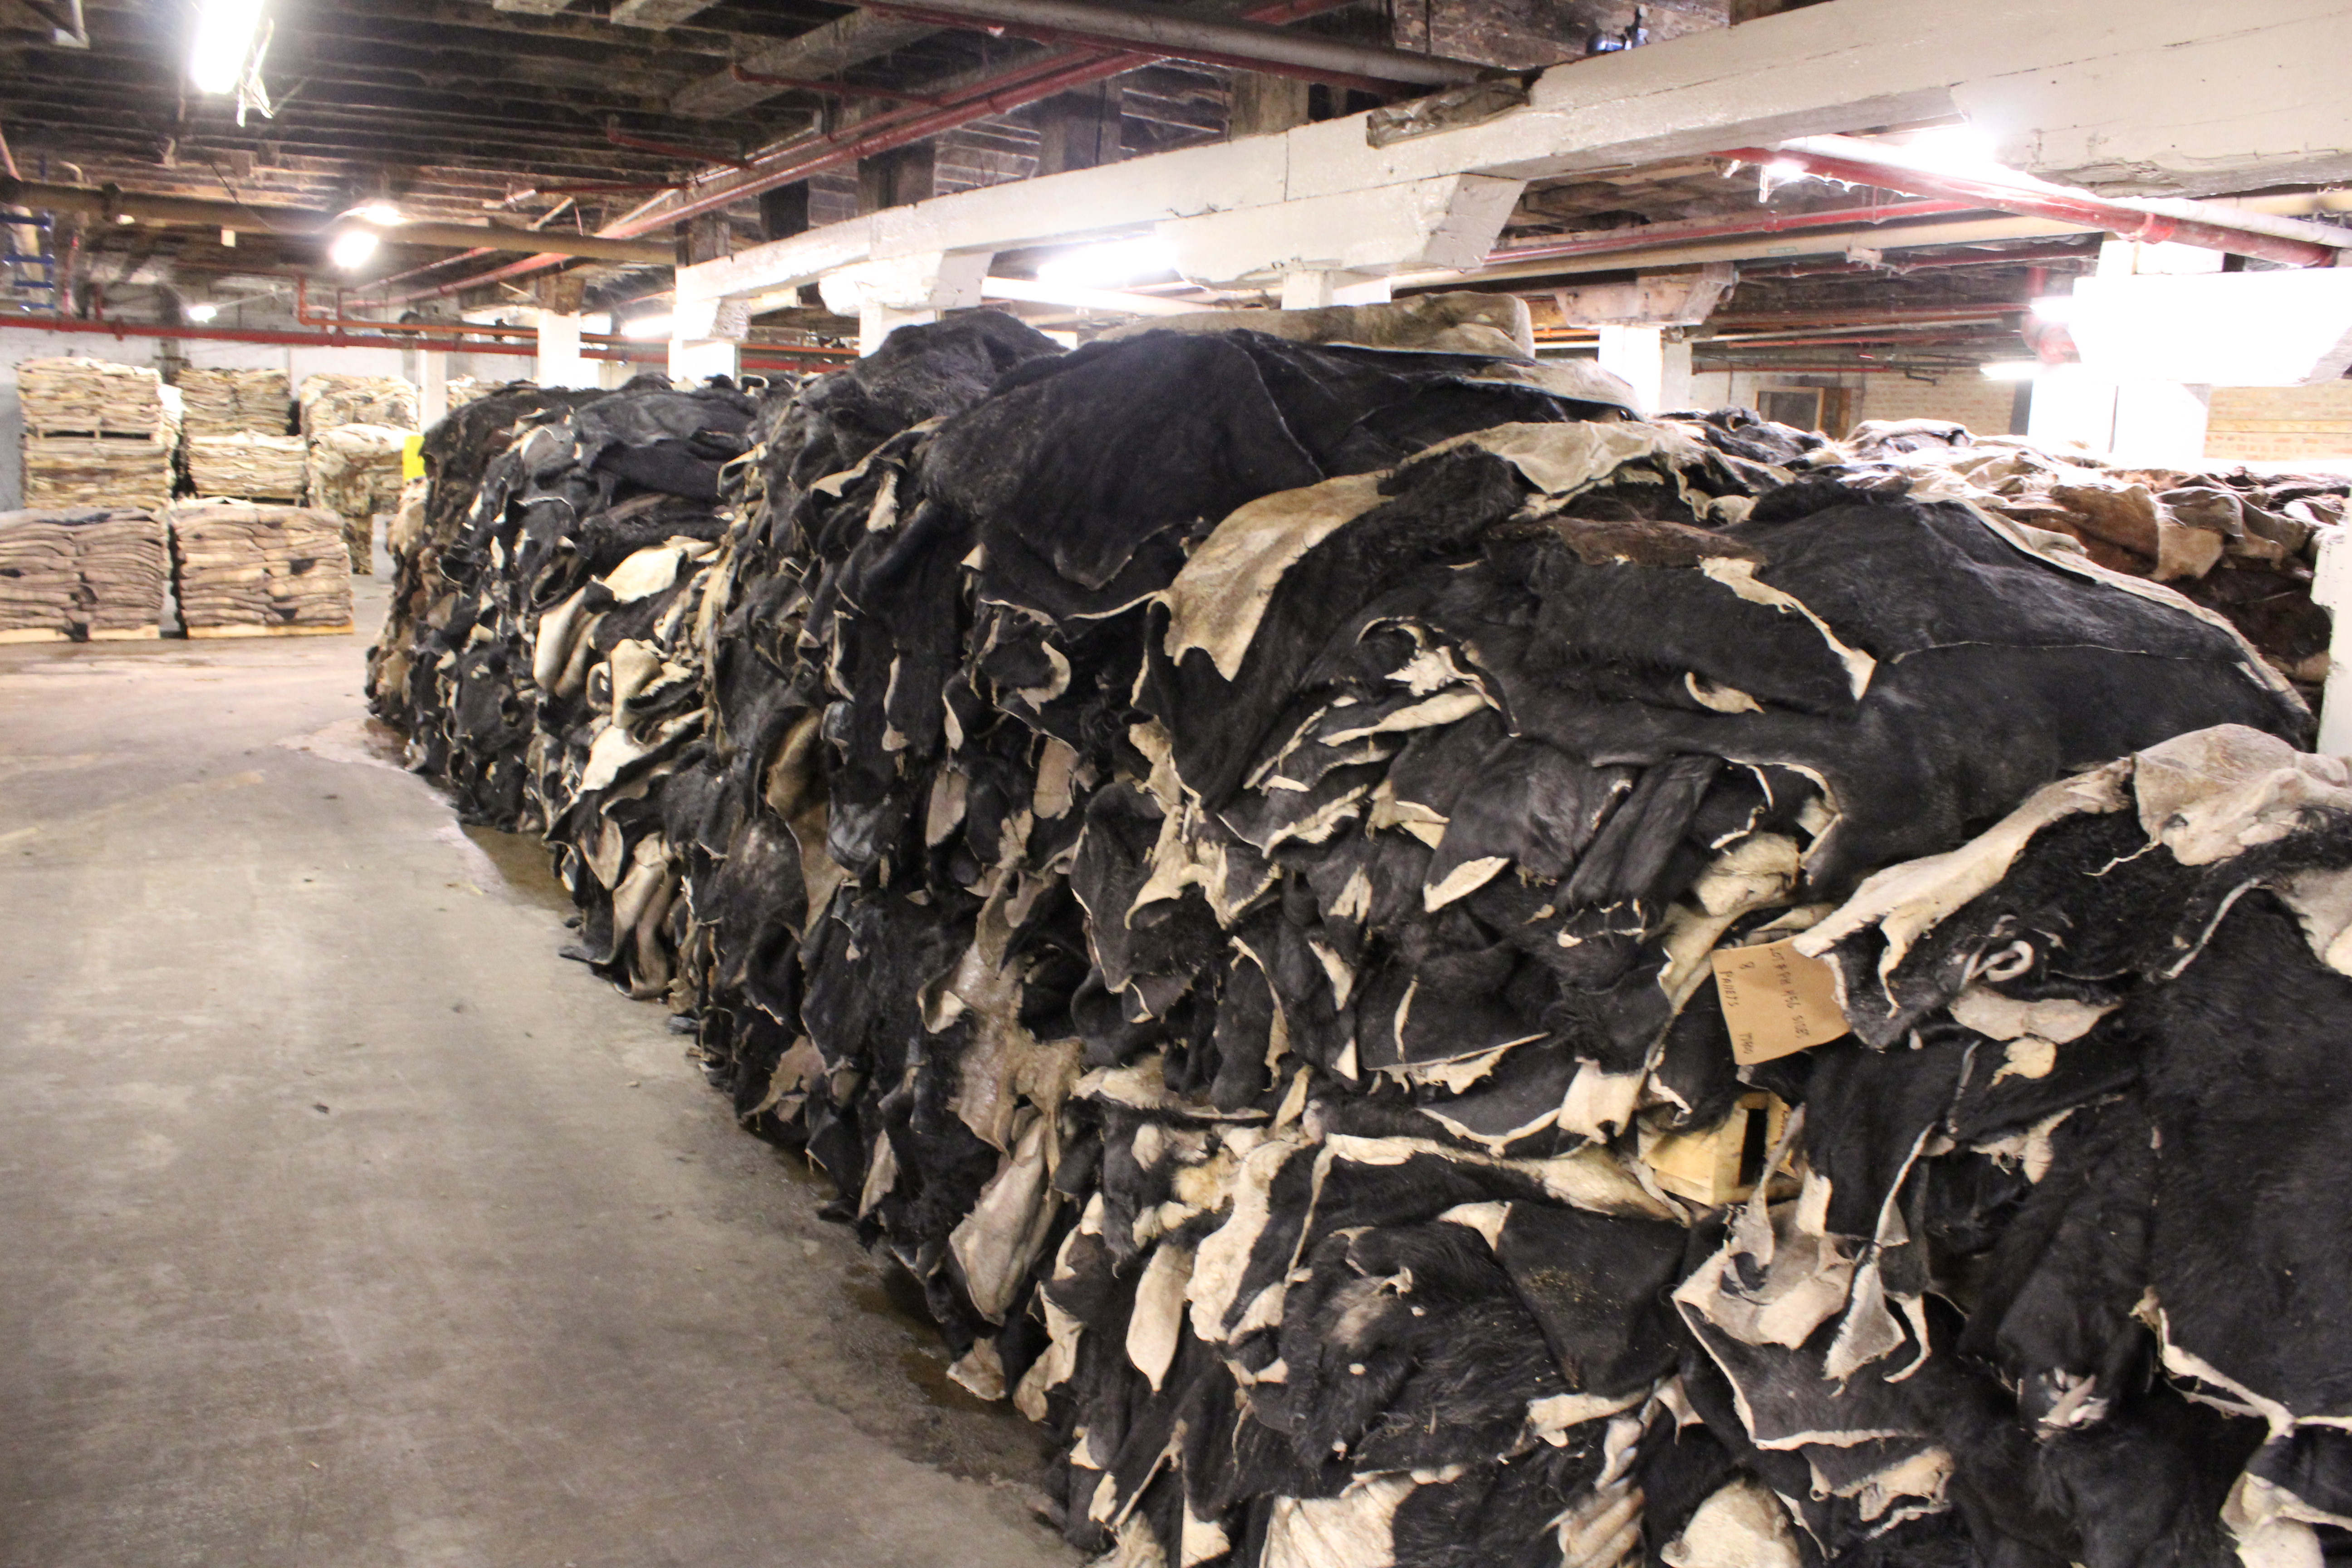 Piles of dark hides not yet de-haired in the factory. (Sarah Julien, 14 East)